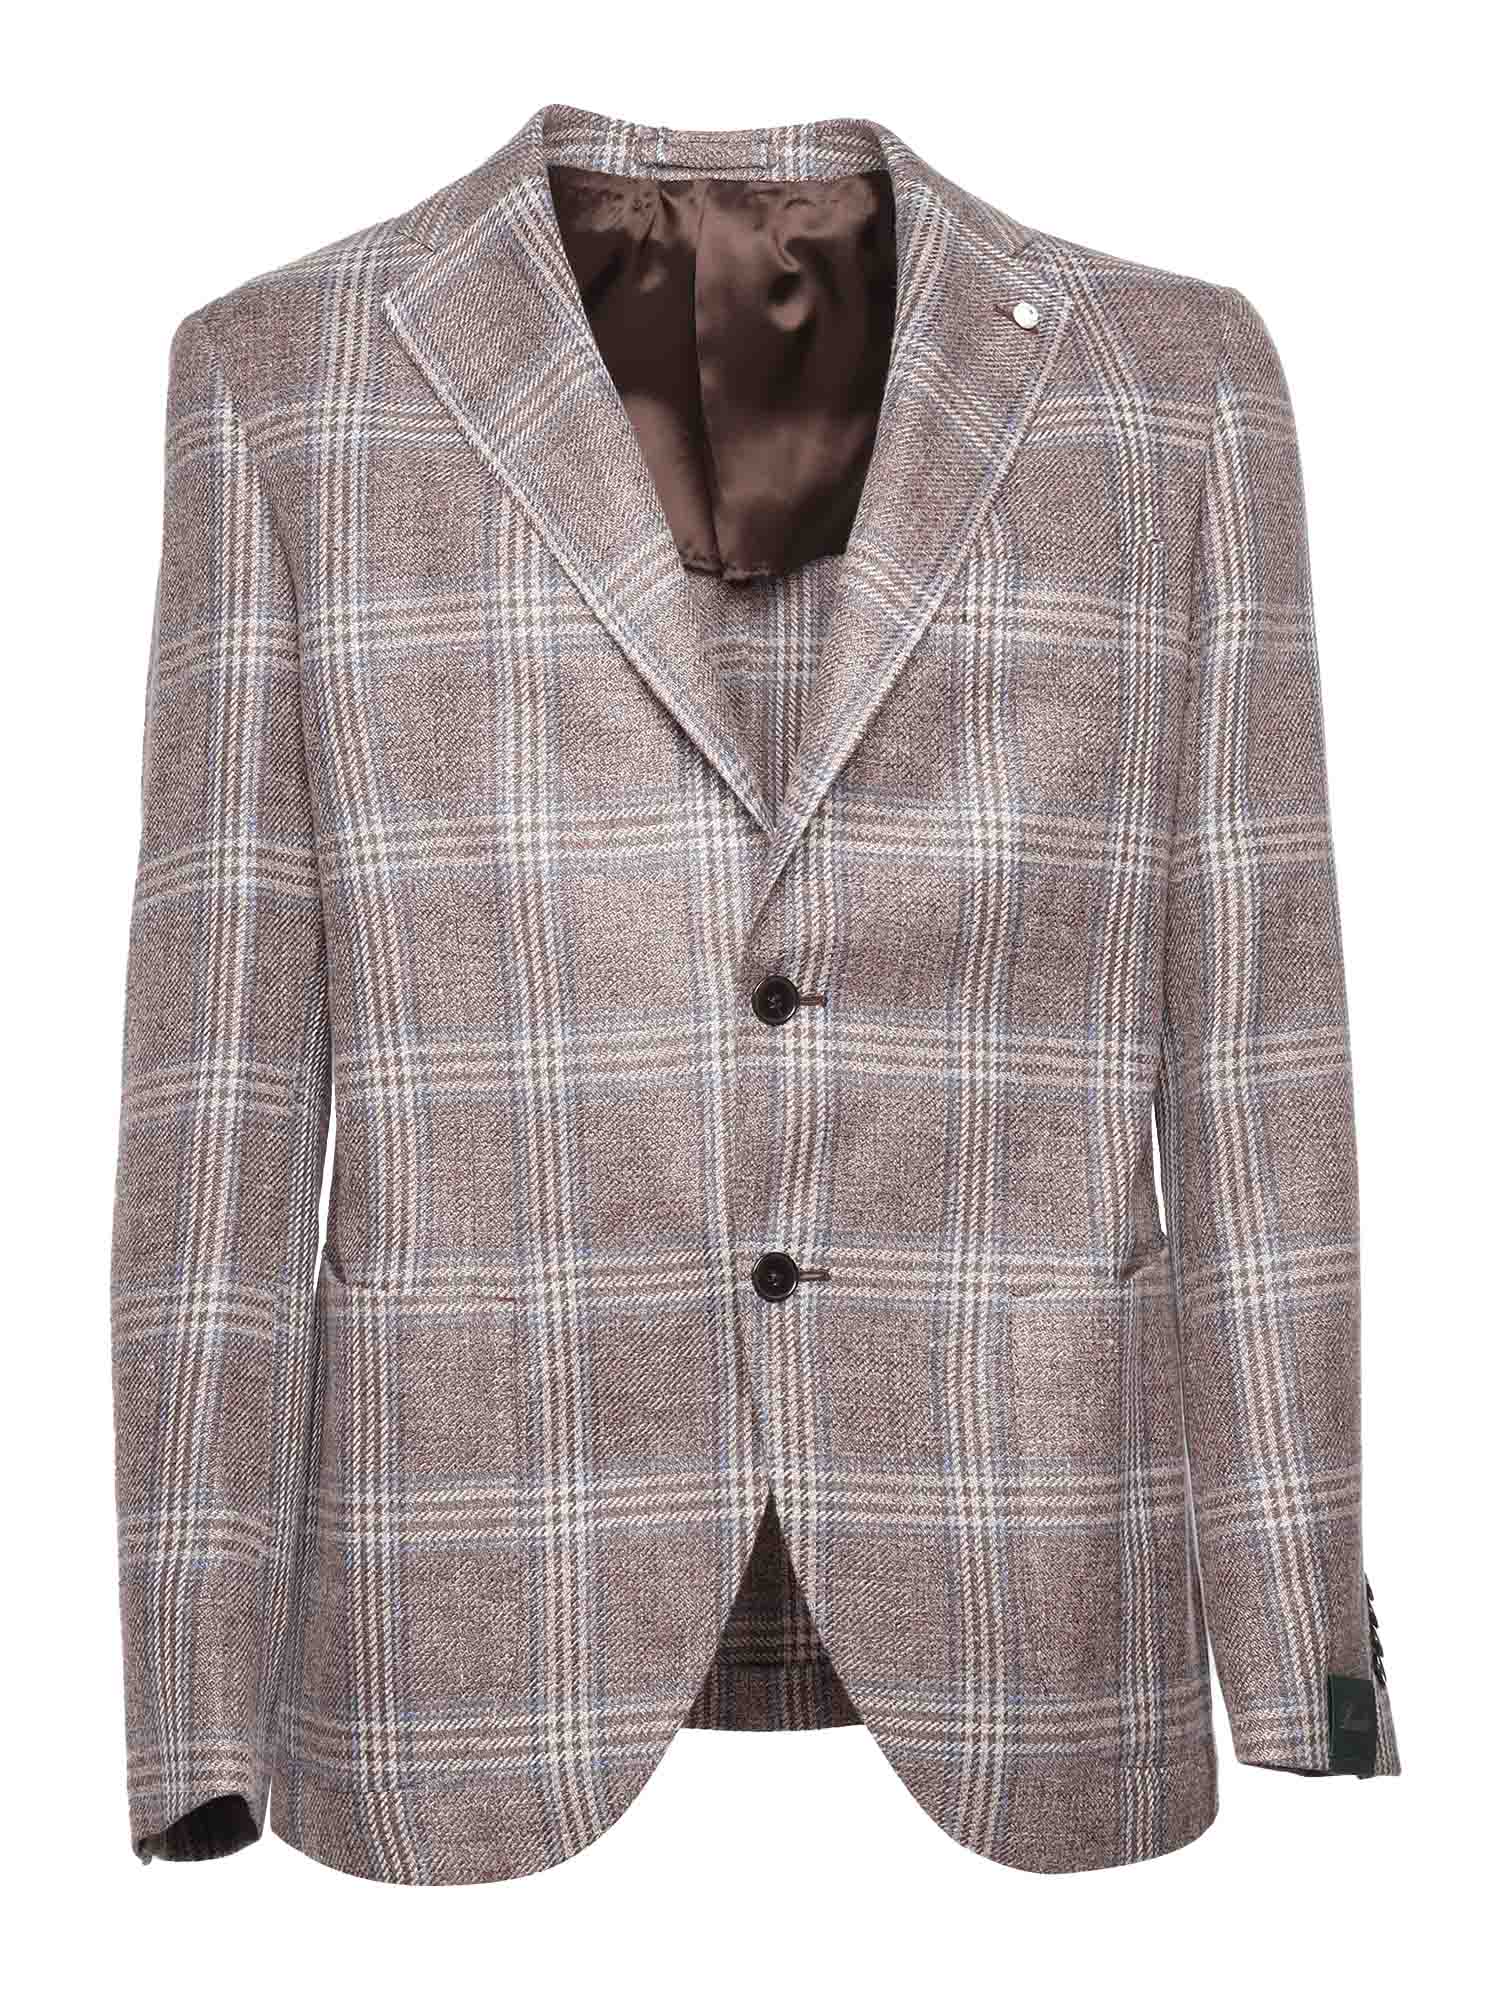 L.B.M. 1911 Houndstooth Check Jacket